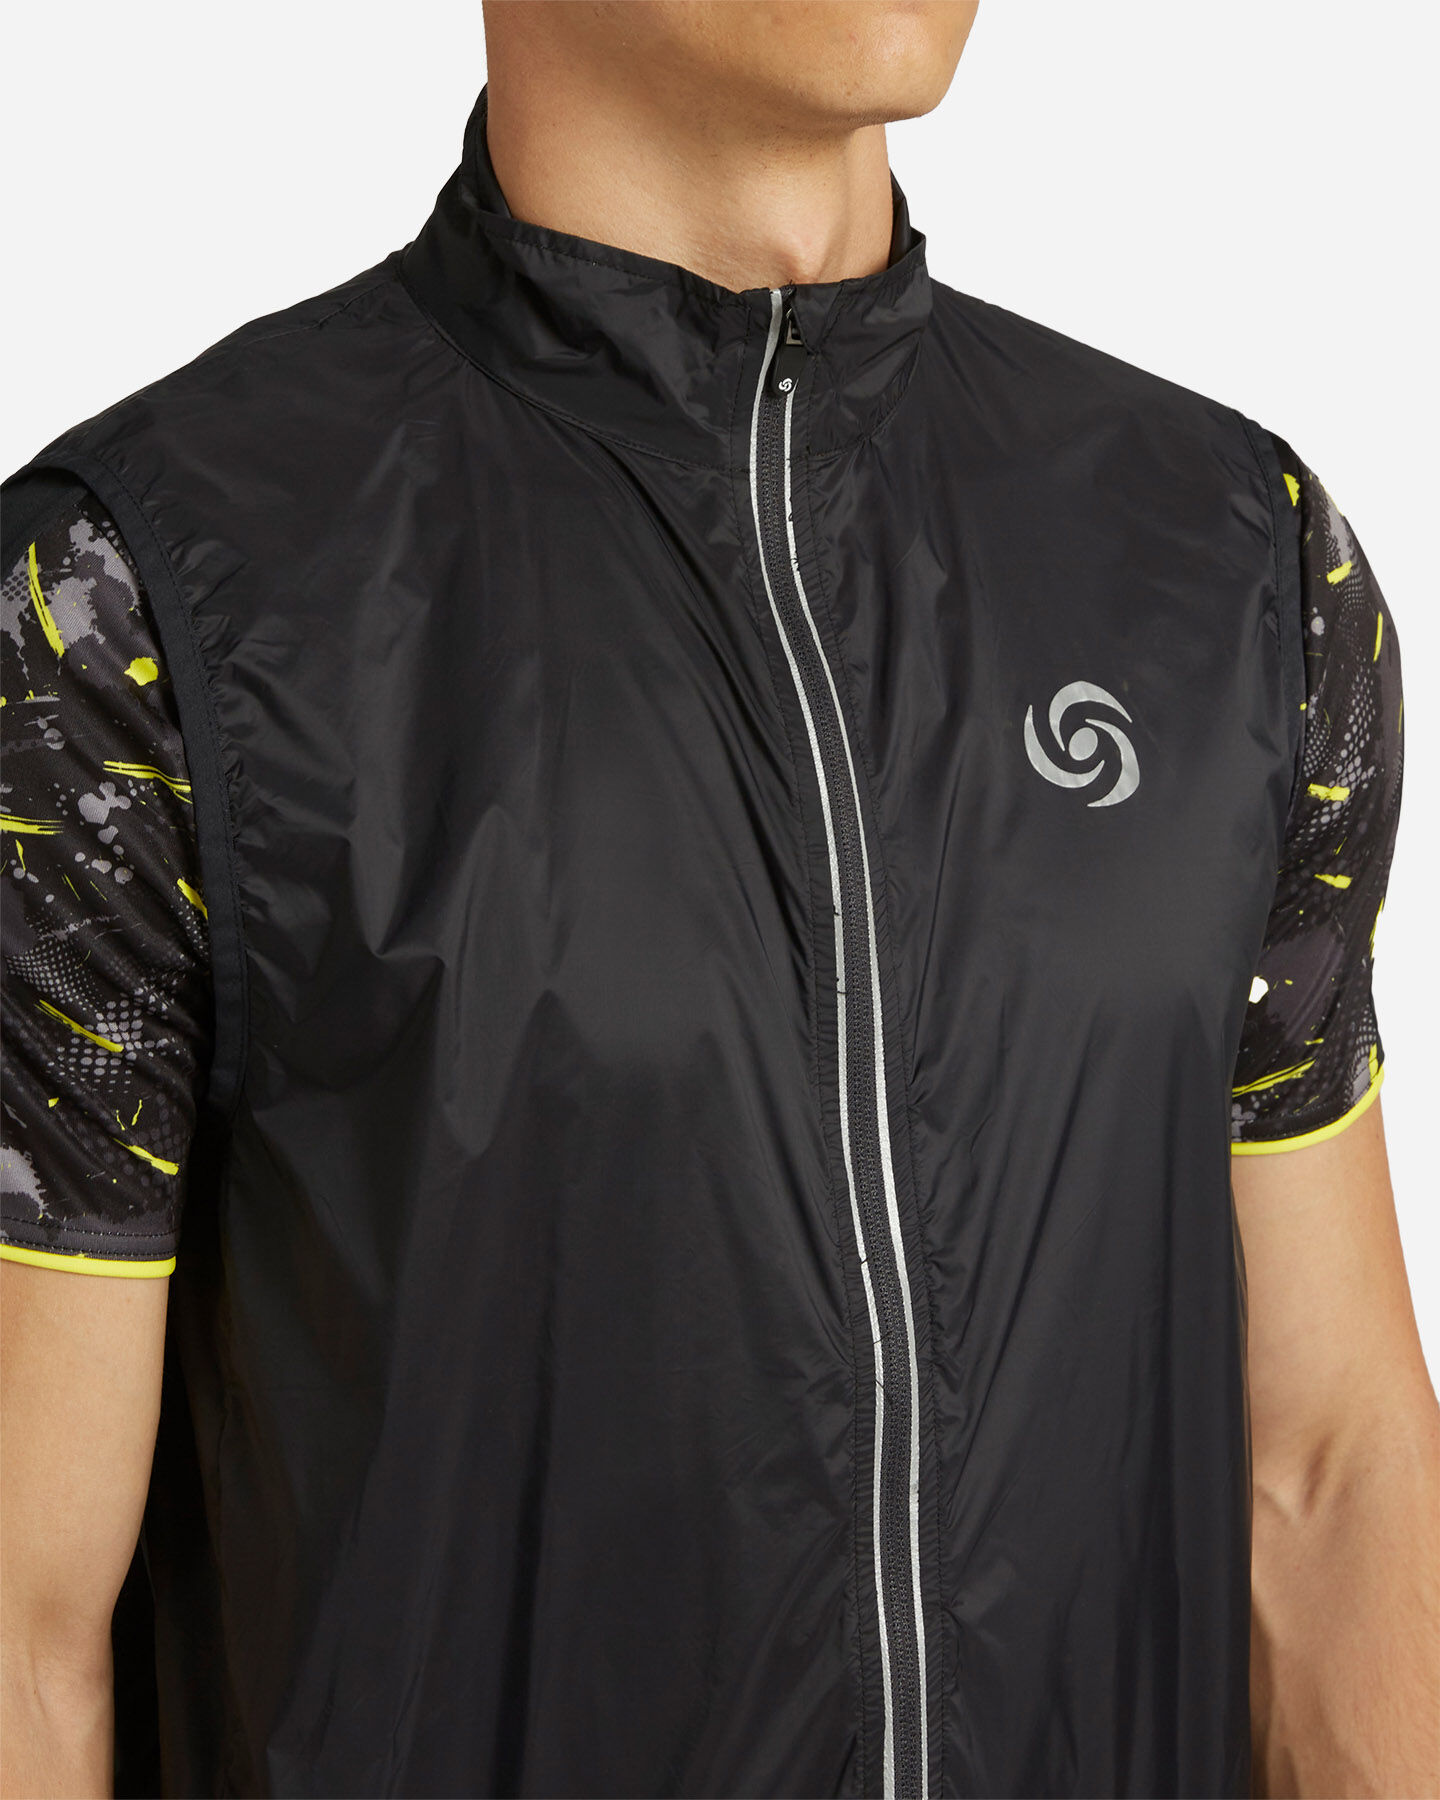  Giacca ciclismo CARNIELLI WINDPROOF FULL ZIP M S5546910|050|S scatto 4